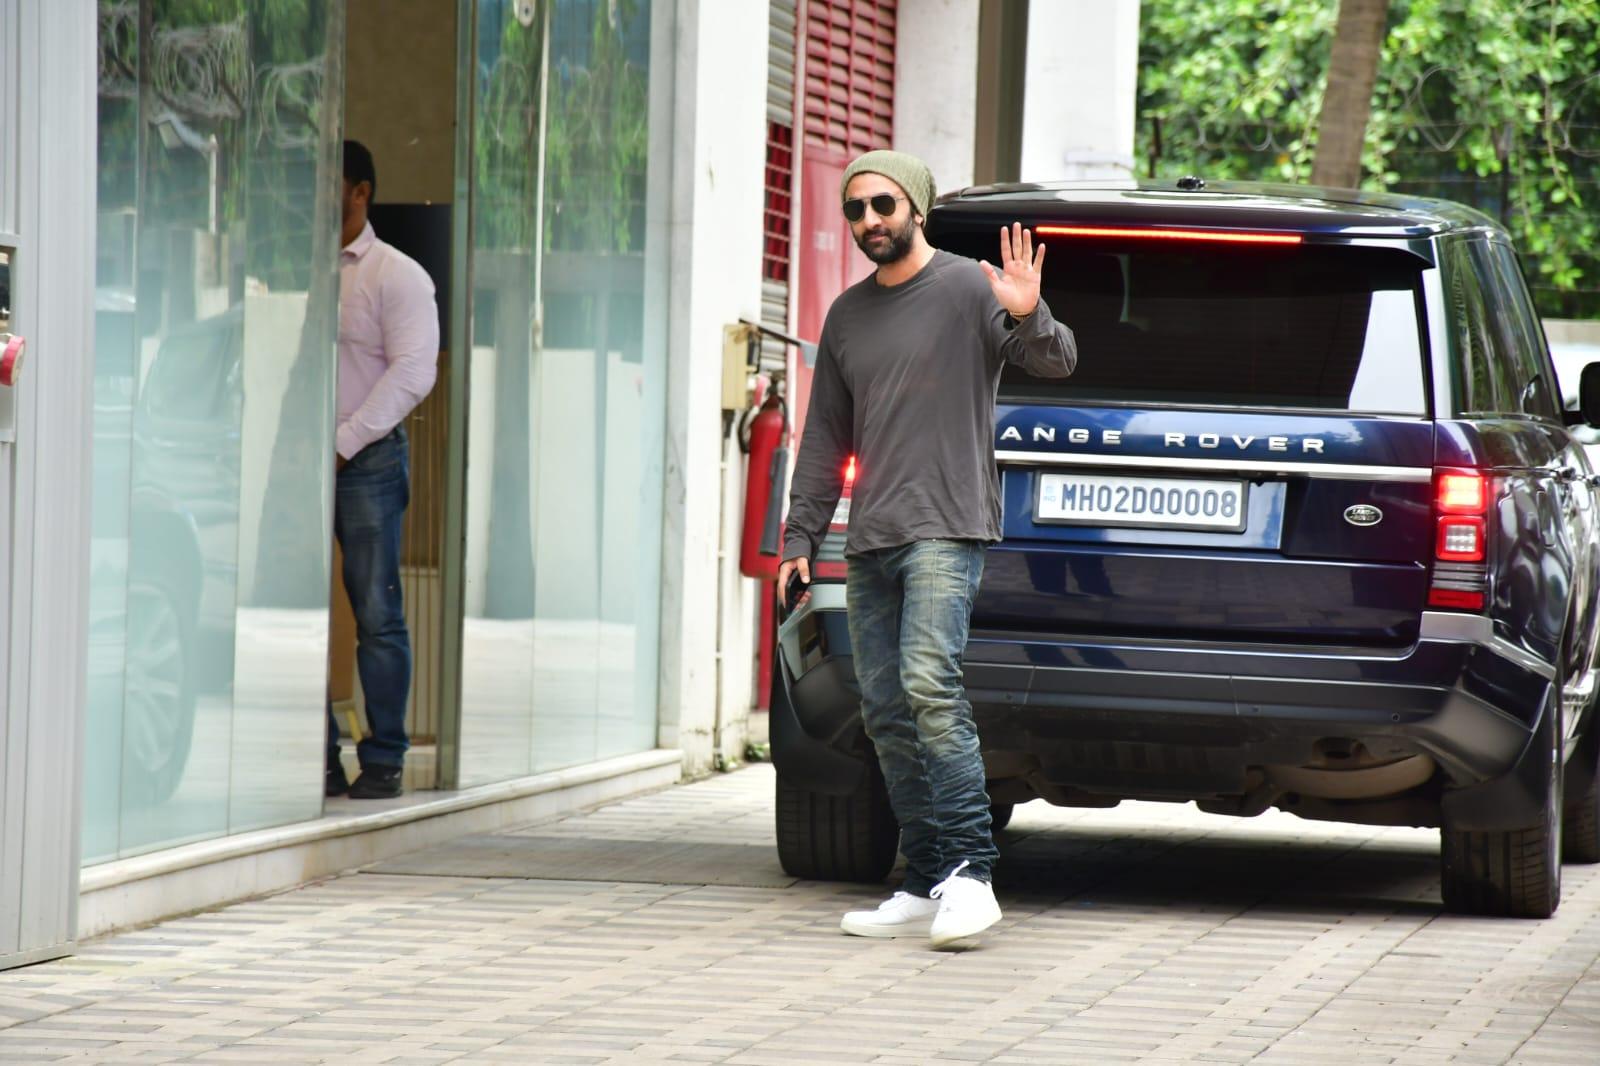 Ranbir graciously smiled and waved for the paparazzi who were in wait for him at the location